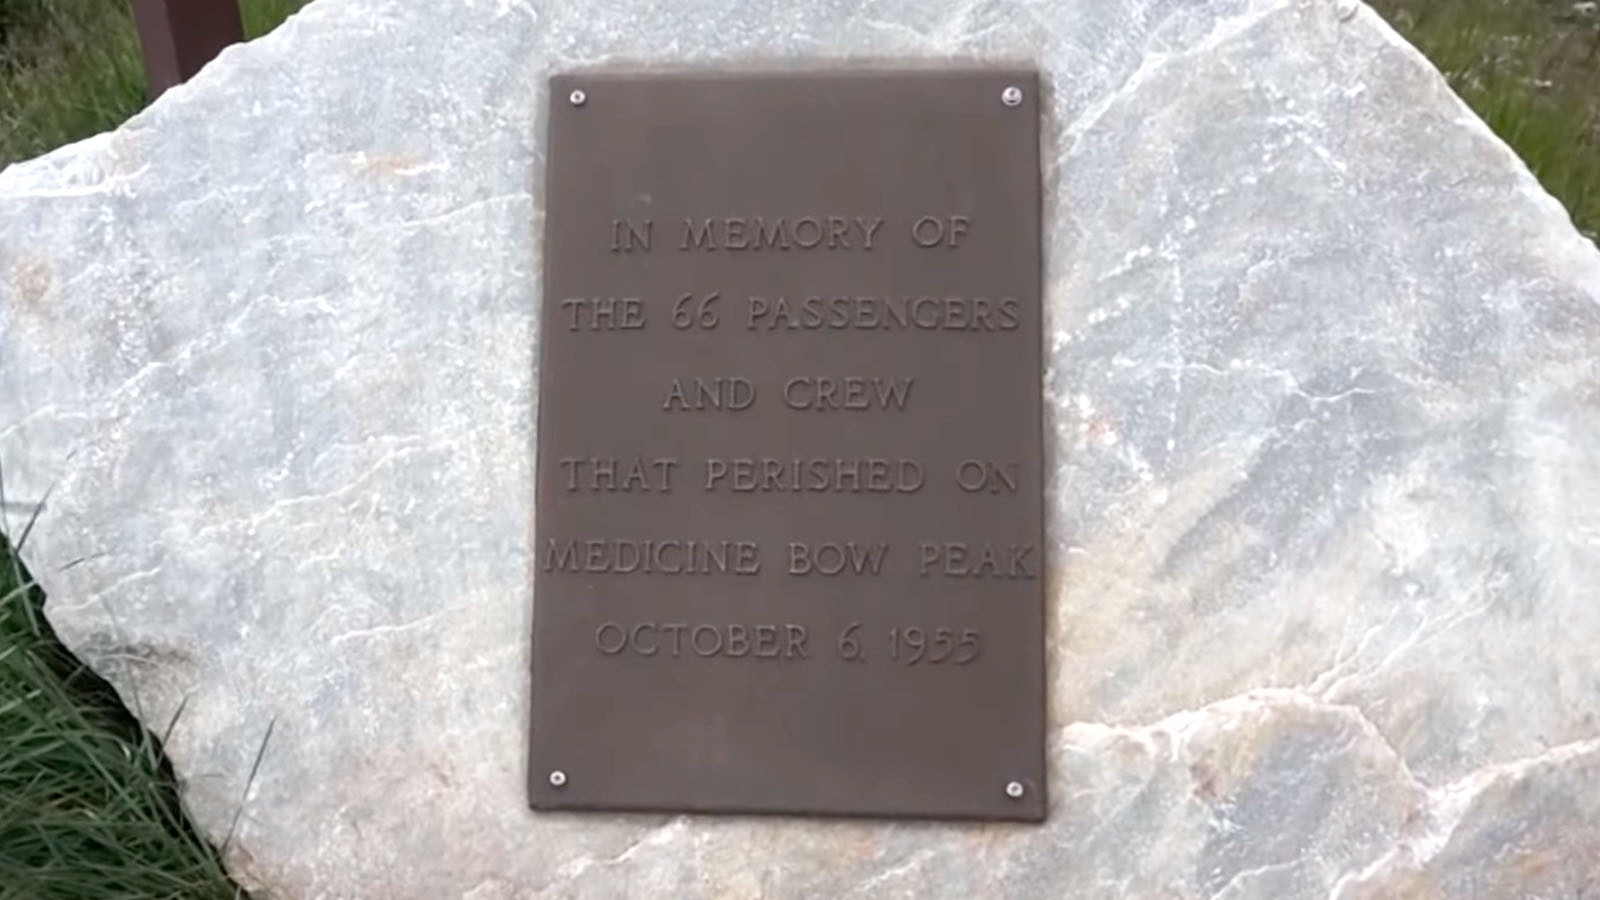 A plaque marks the area where 66 people died in 1955 when United Airlines Flight 409 crashed into Medicine Bow Peak.